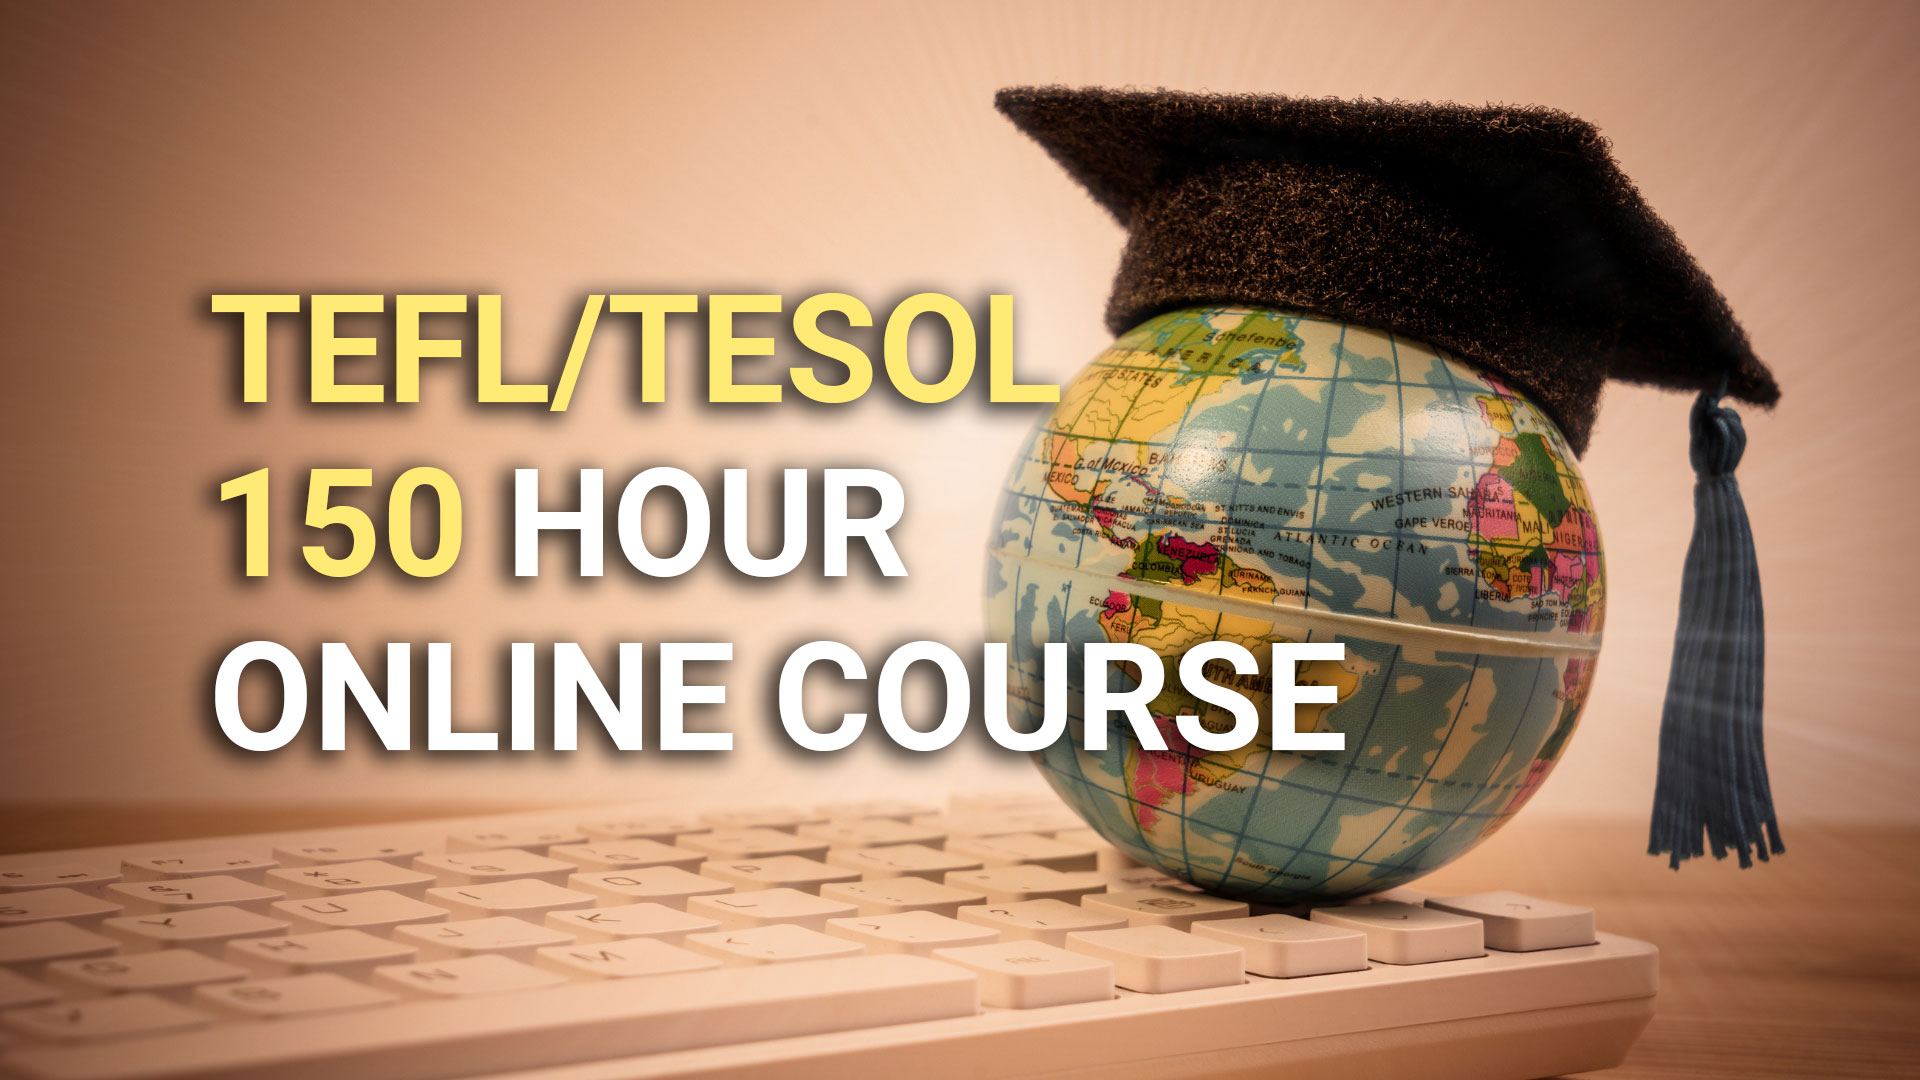 TEFL/TESOL 150 hour online course